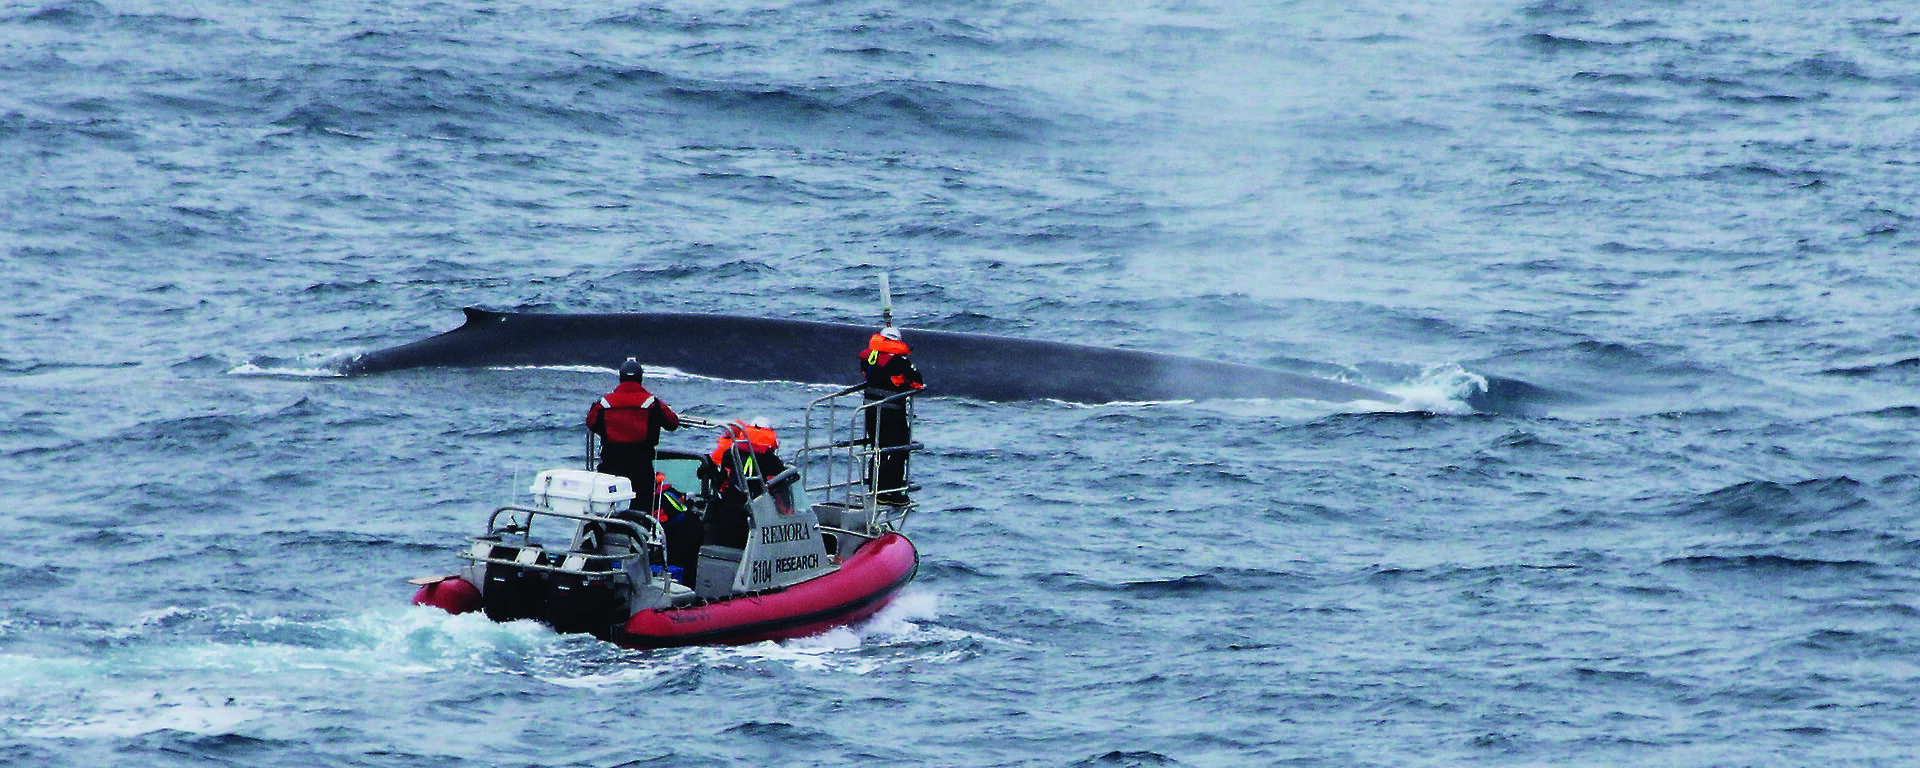 Scientists approach a blue whale in a small boat to attach a satellite tag.